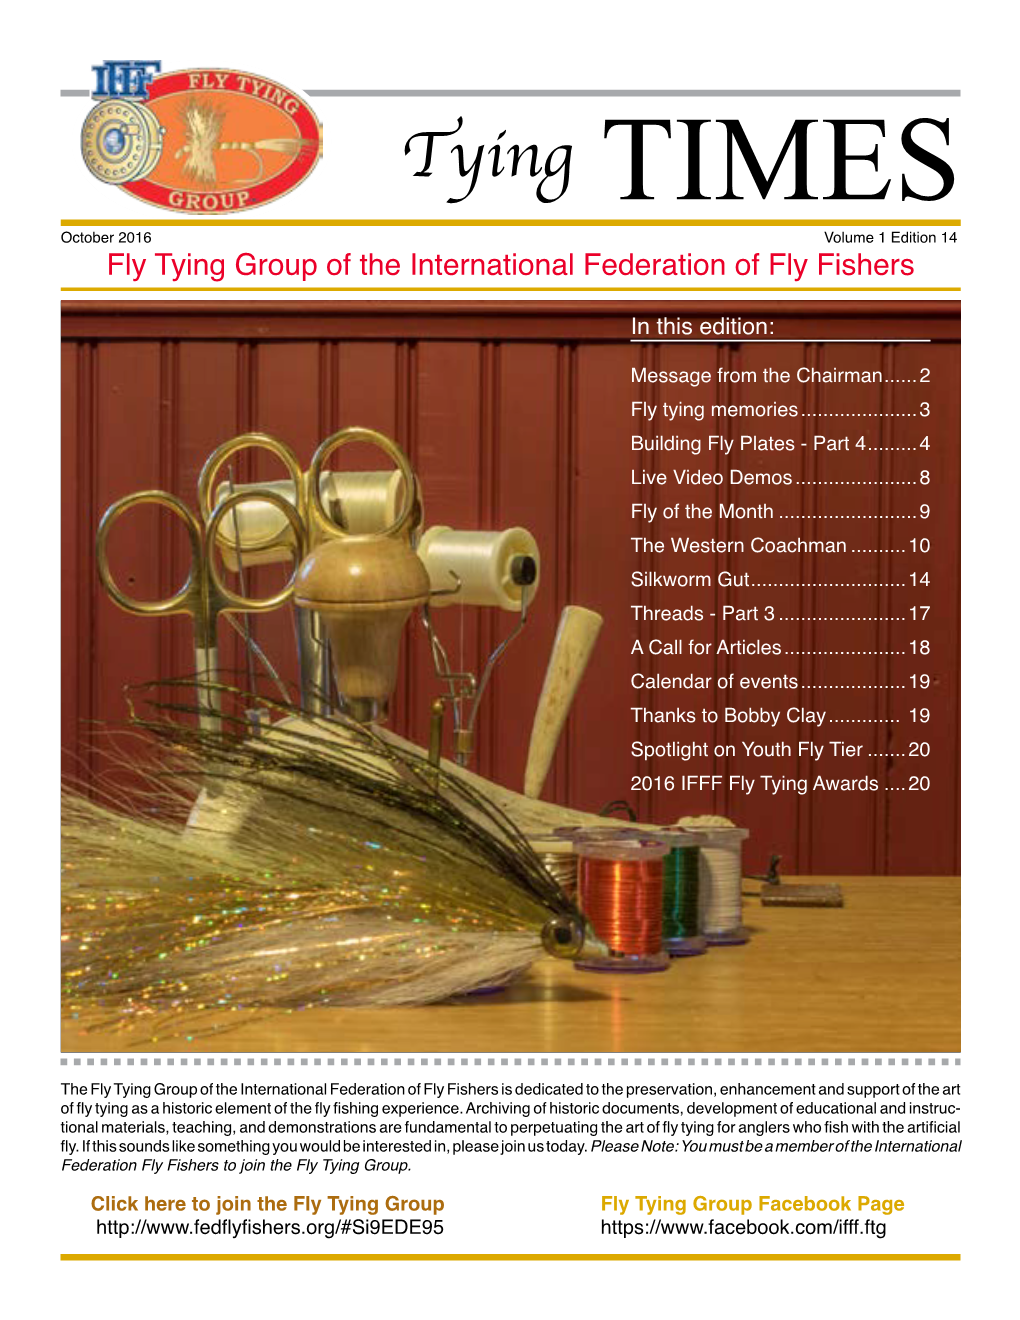 Tying TIMES October 2016 Volume 1 Edition 14 Fly Tying Group of the International Federation of Fly Fishers